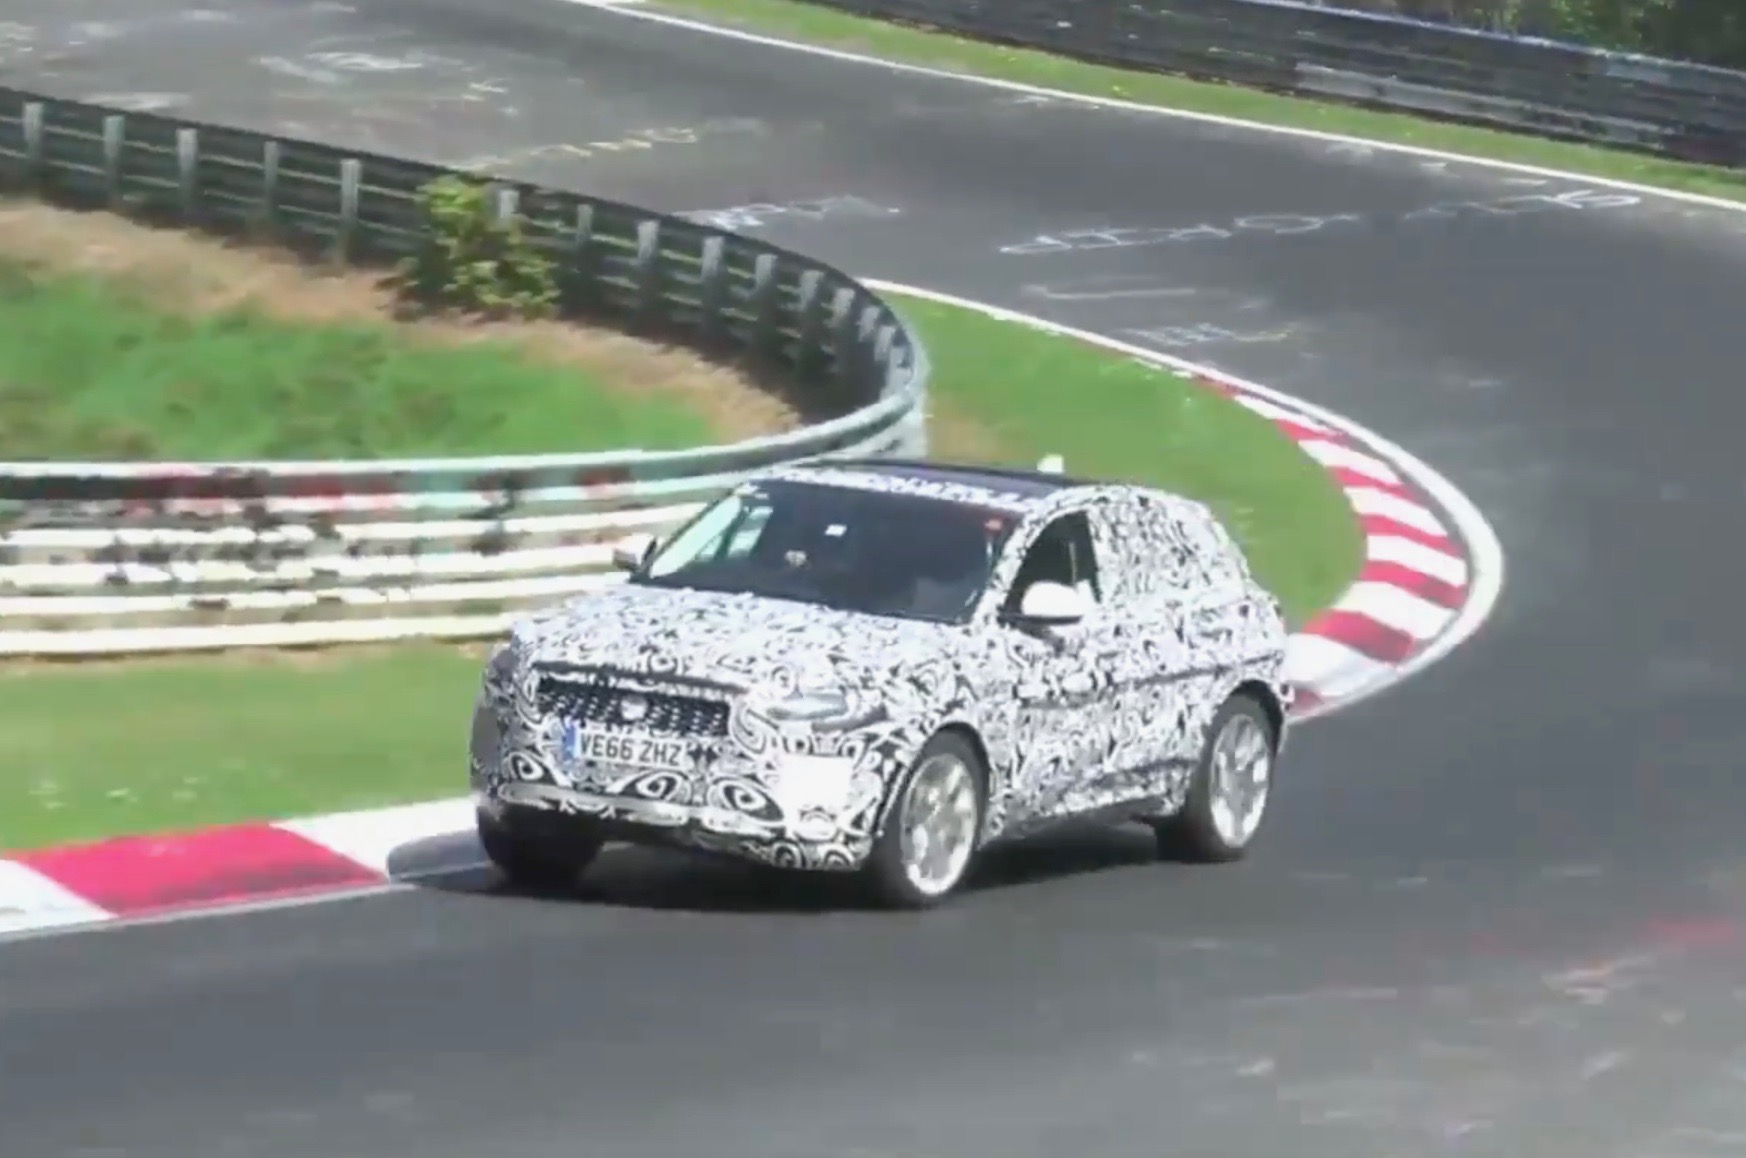 Jaguar E-Pace spotted during torturous Nurburgring test (video)